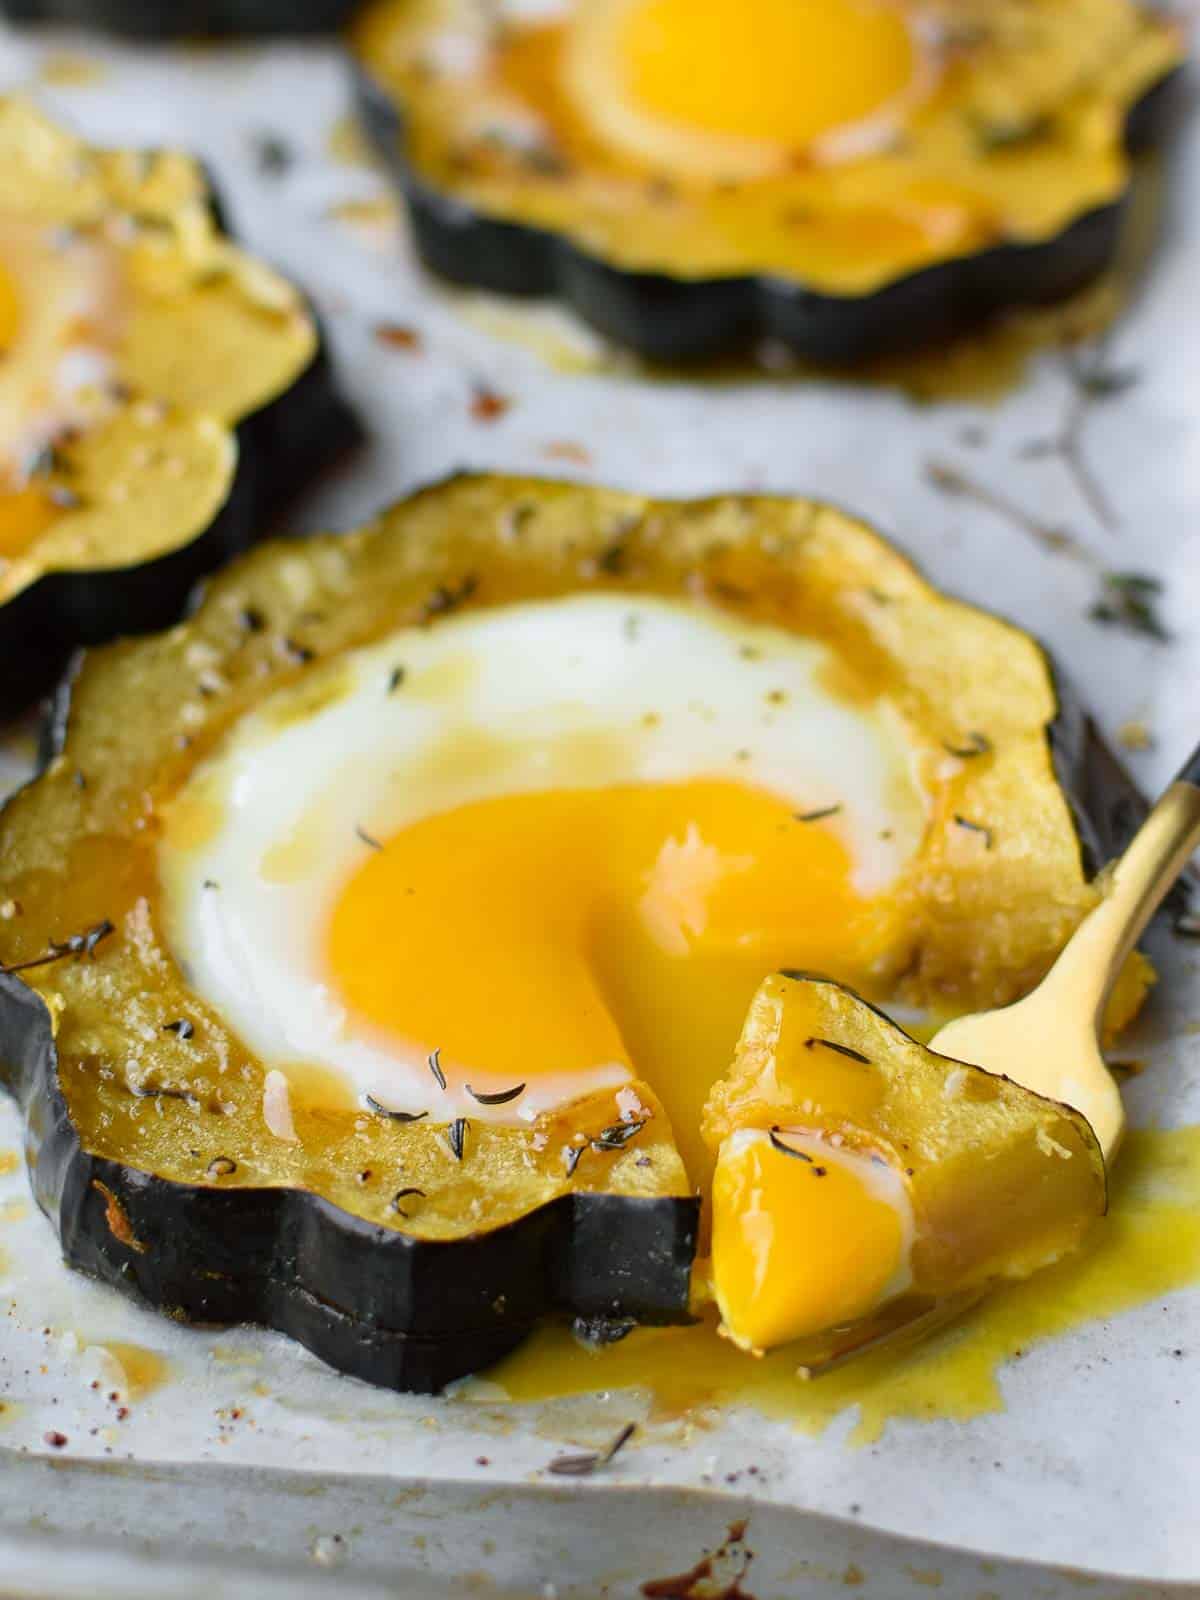 Angled view of acorn squash egg in a hole with a fork bit taken out and dripping yolk.